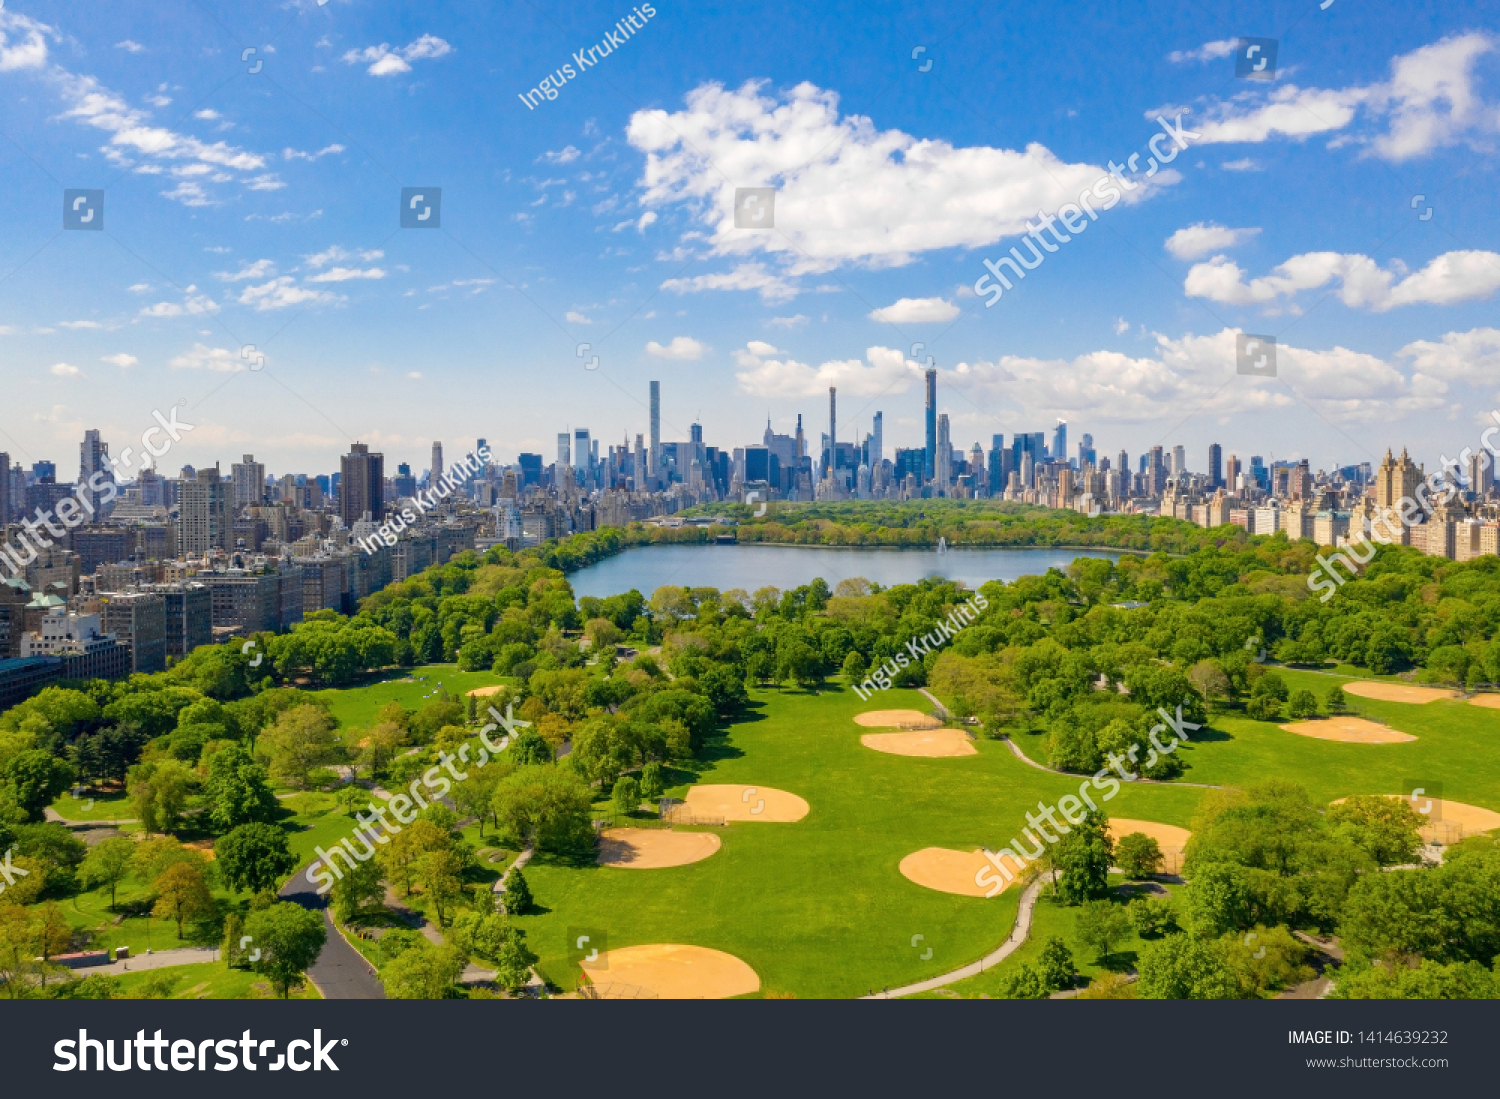 Aerial view of the Central park in New York with golf fields and tall skyscrapers surrounding the park. #1414639232